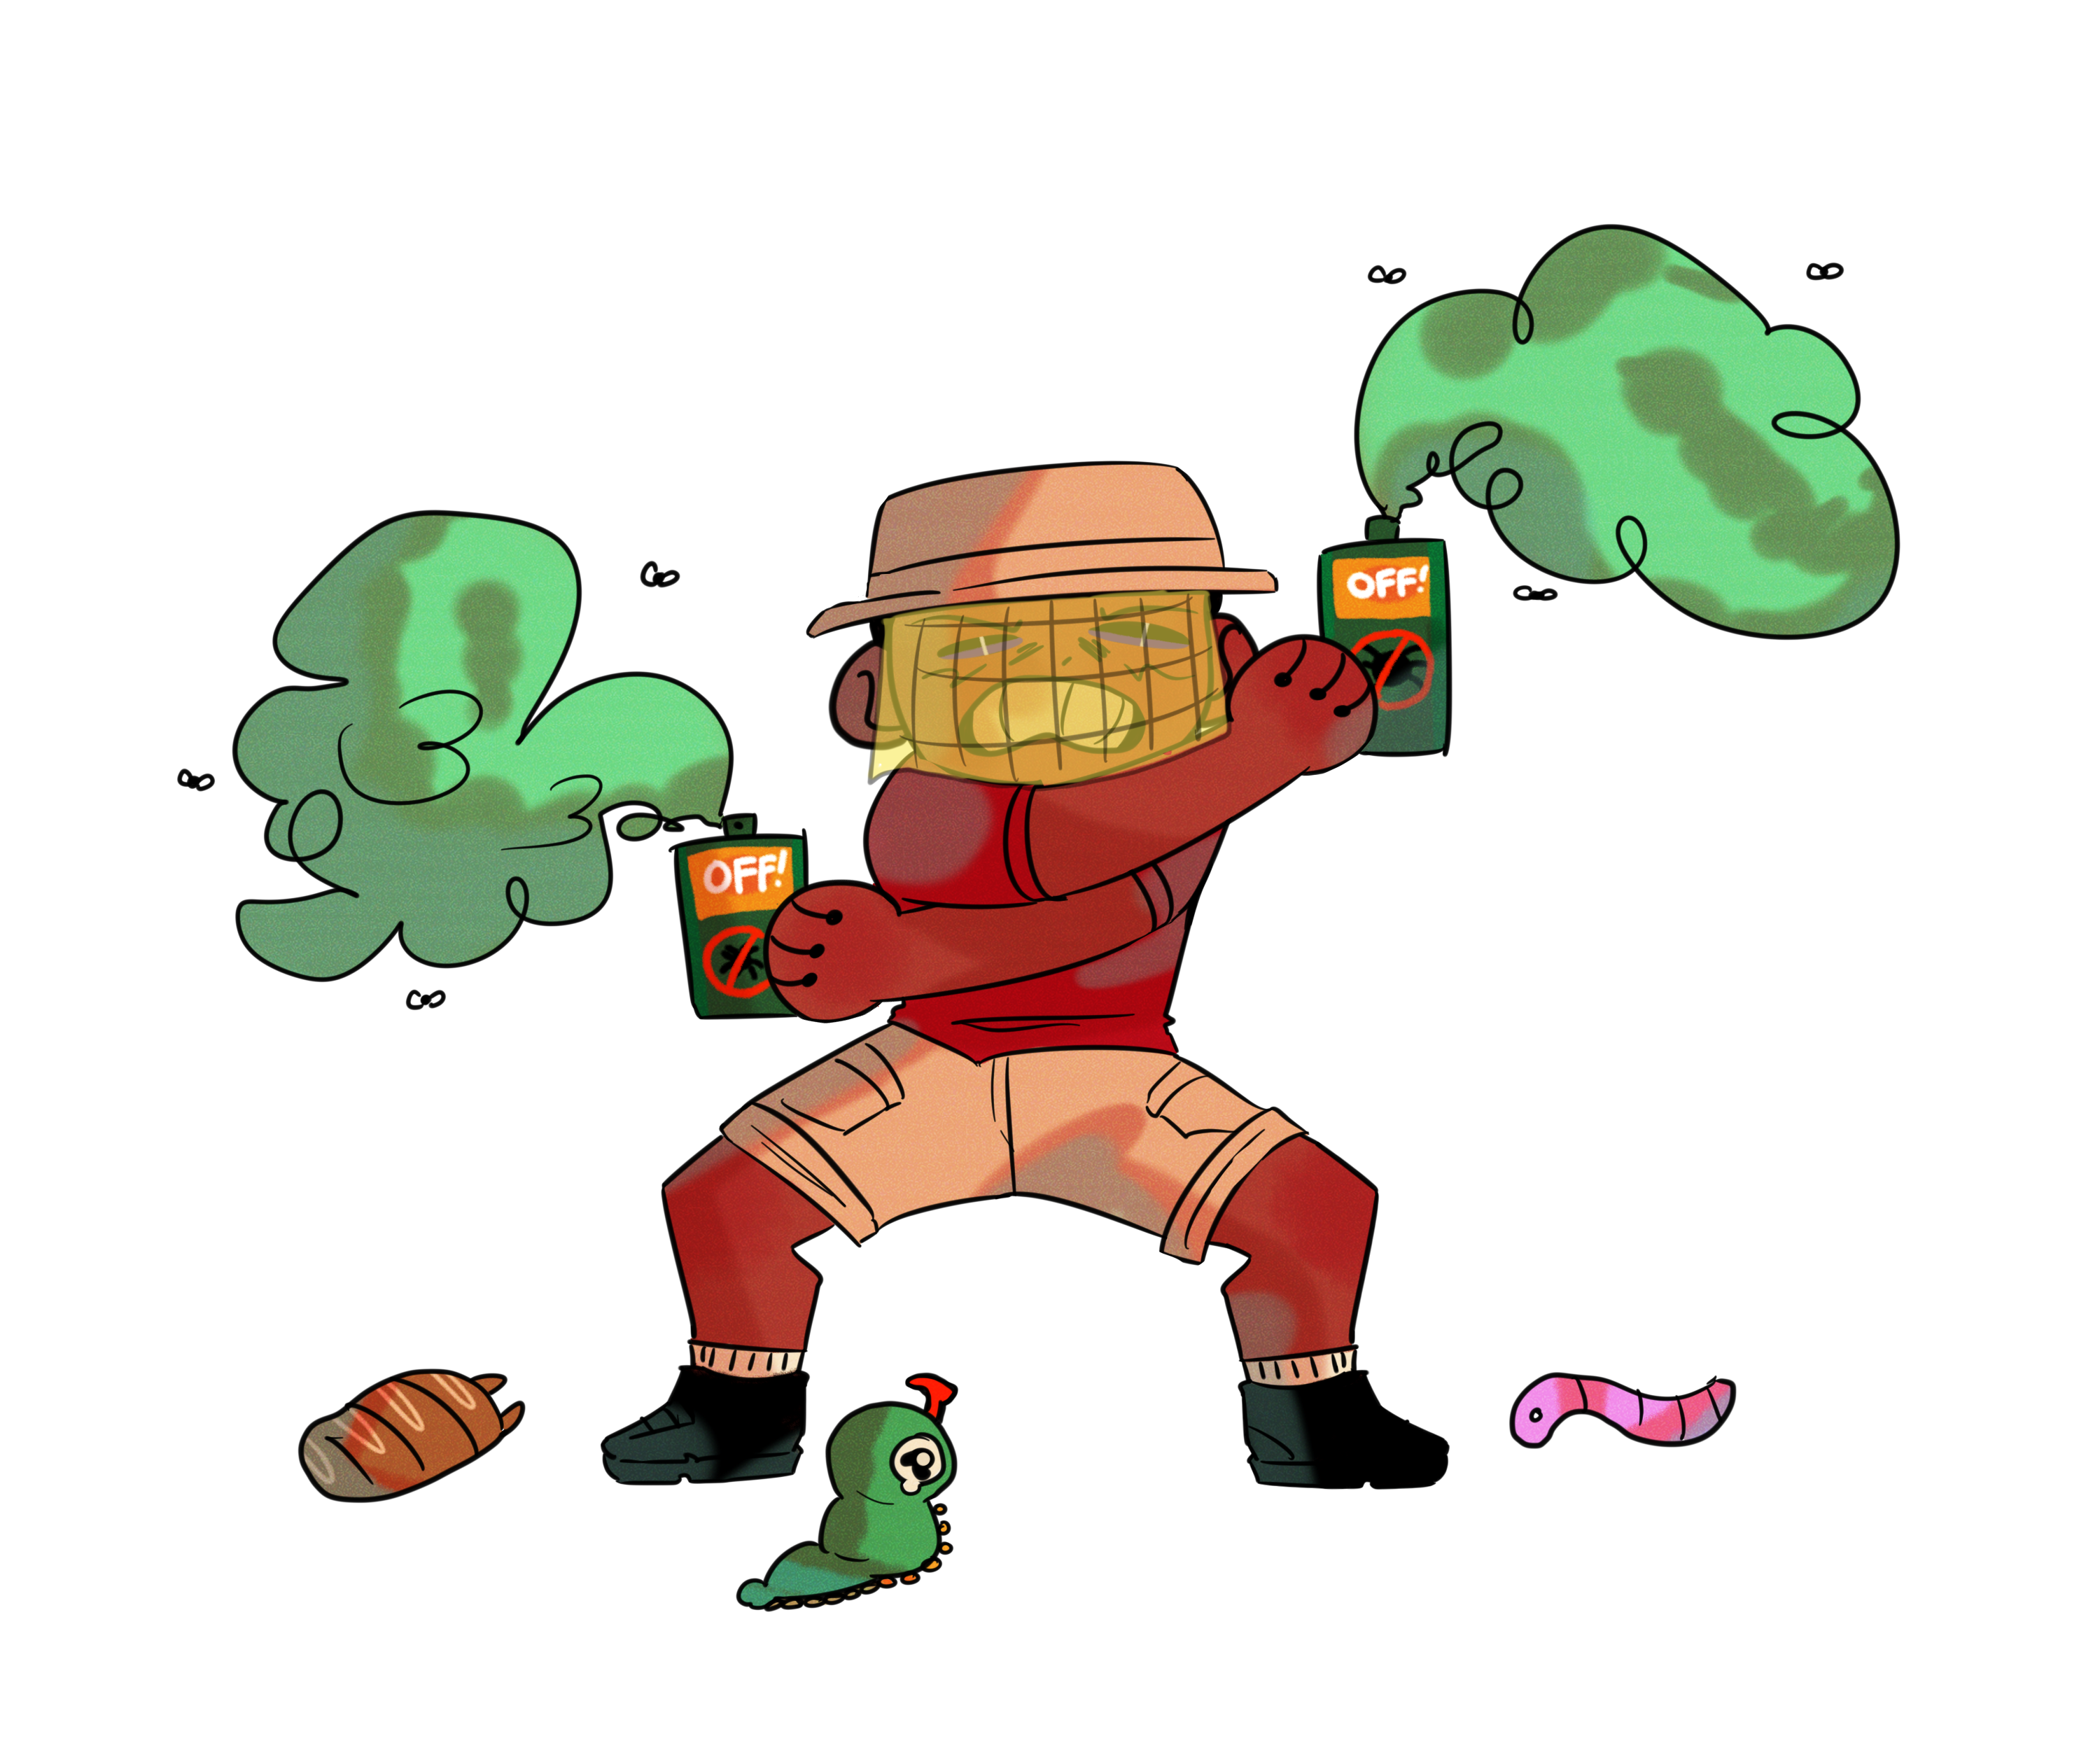 Illustration of a person in camping gear and a hat with netting around their face, in a fighting stance, carrying Bug spray in their hands